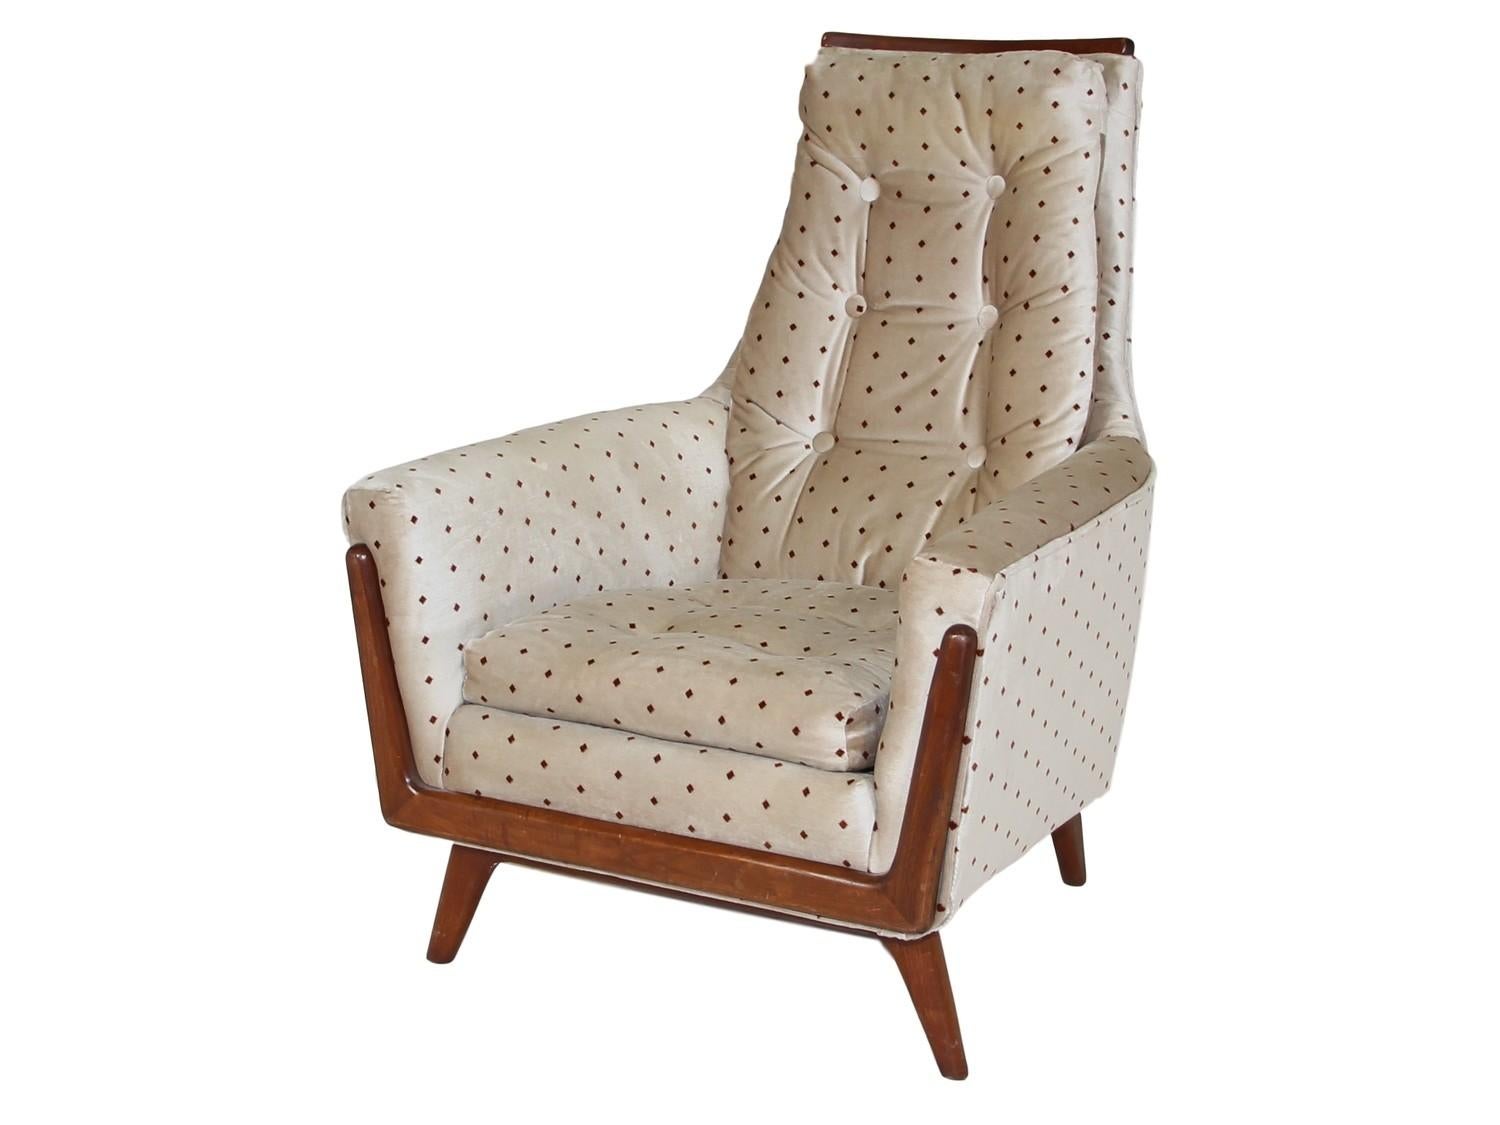 Vintage midcentury chair inspired by Adrian Pearsall made by Rowe. The cream colored fabric appears to have been re-upholstered.

Very good vintage condition: Some minor signs of wear consistent with age and use. Please see photo's.